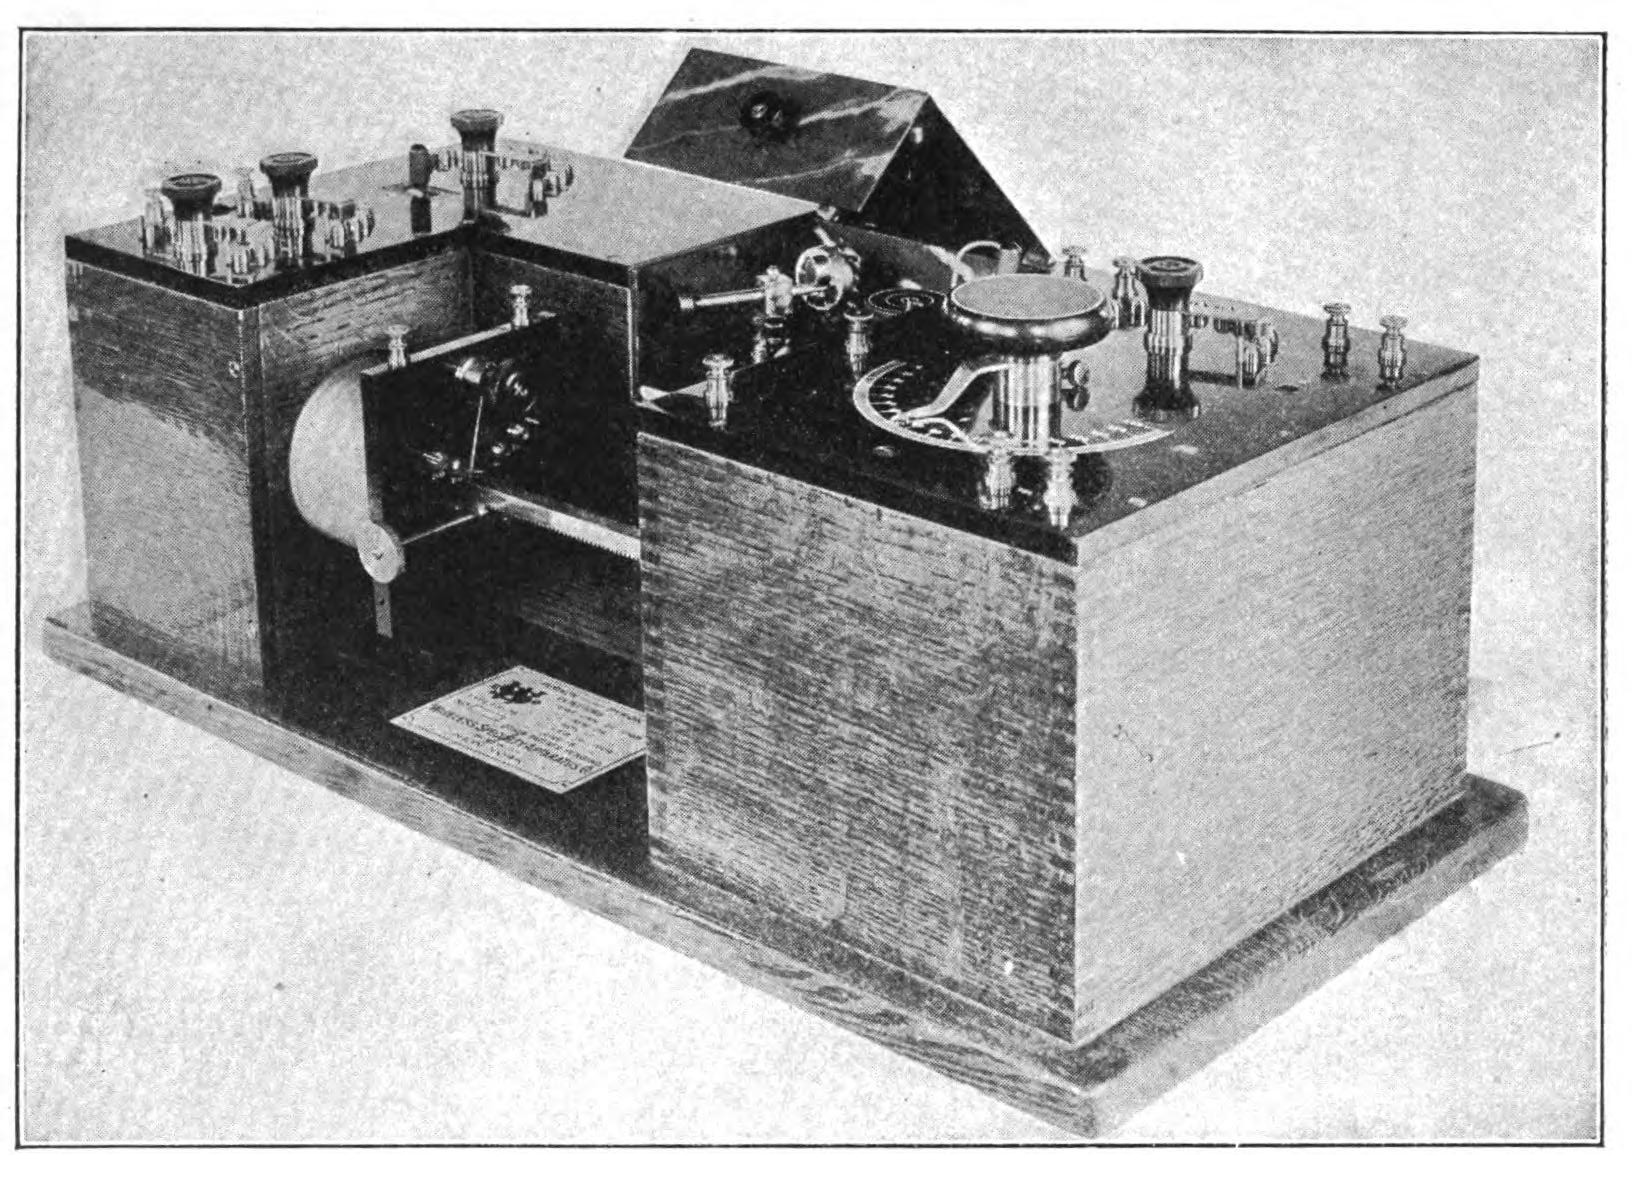 FIG. 63.—Complete receiving set, consisting of two "Perikon" detectors, potentiometer, loose coupler, variable condenser, etc.